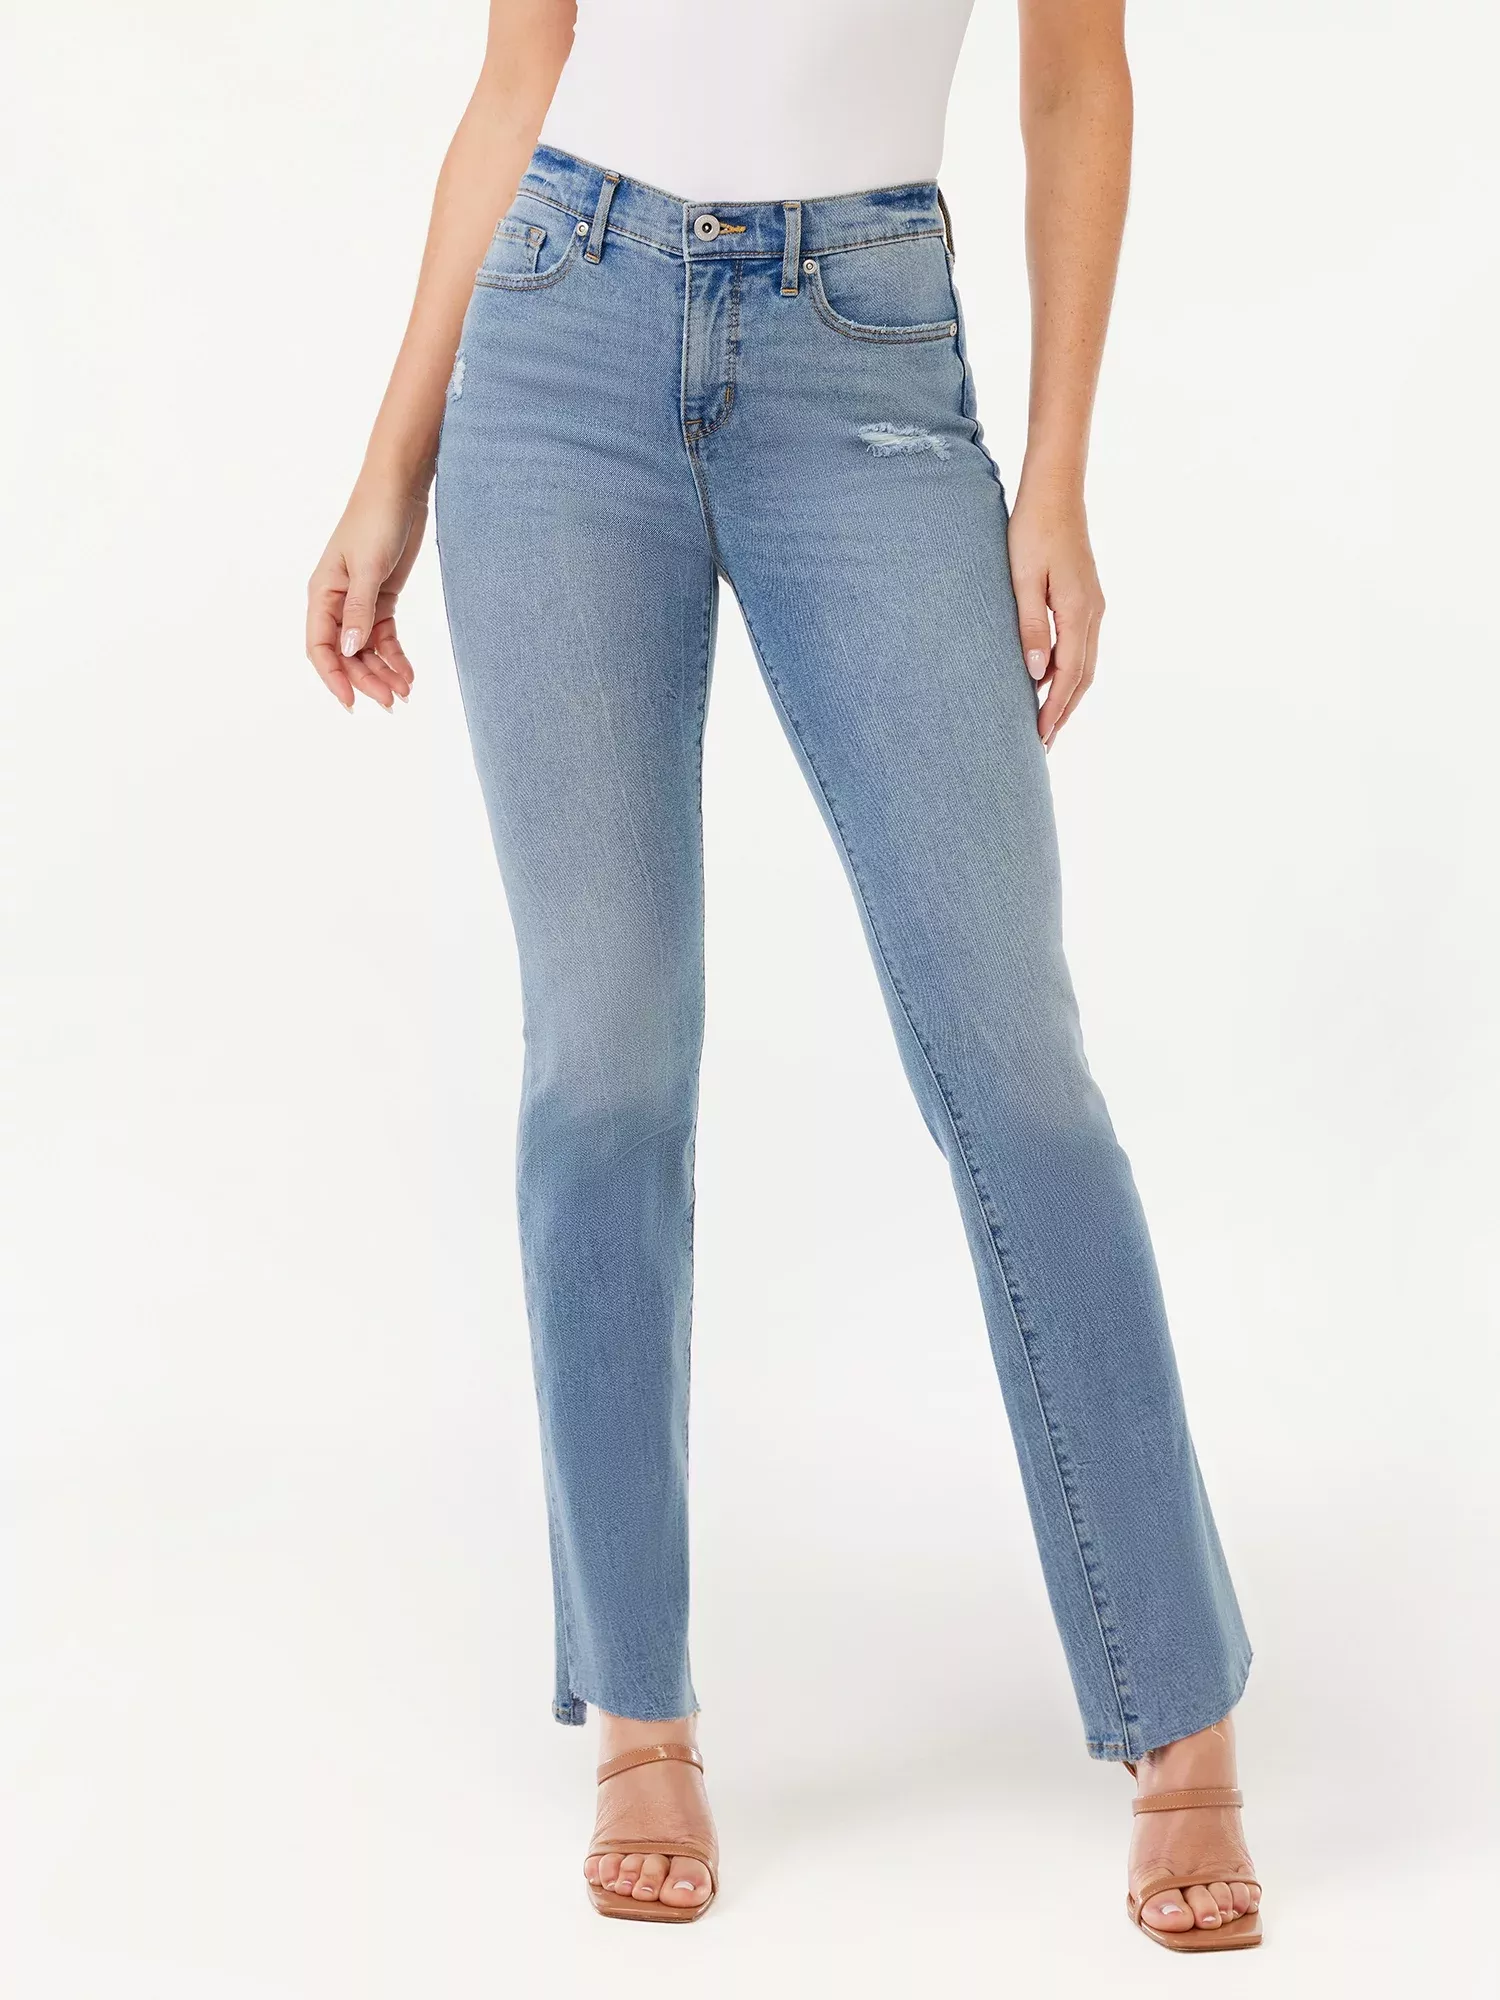 I love Sofia Vergara jeans and there is no shortage of options and